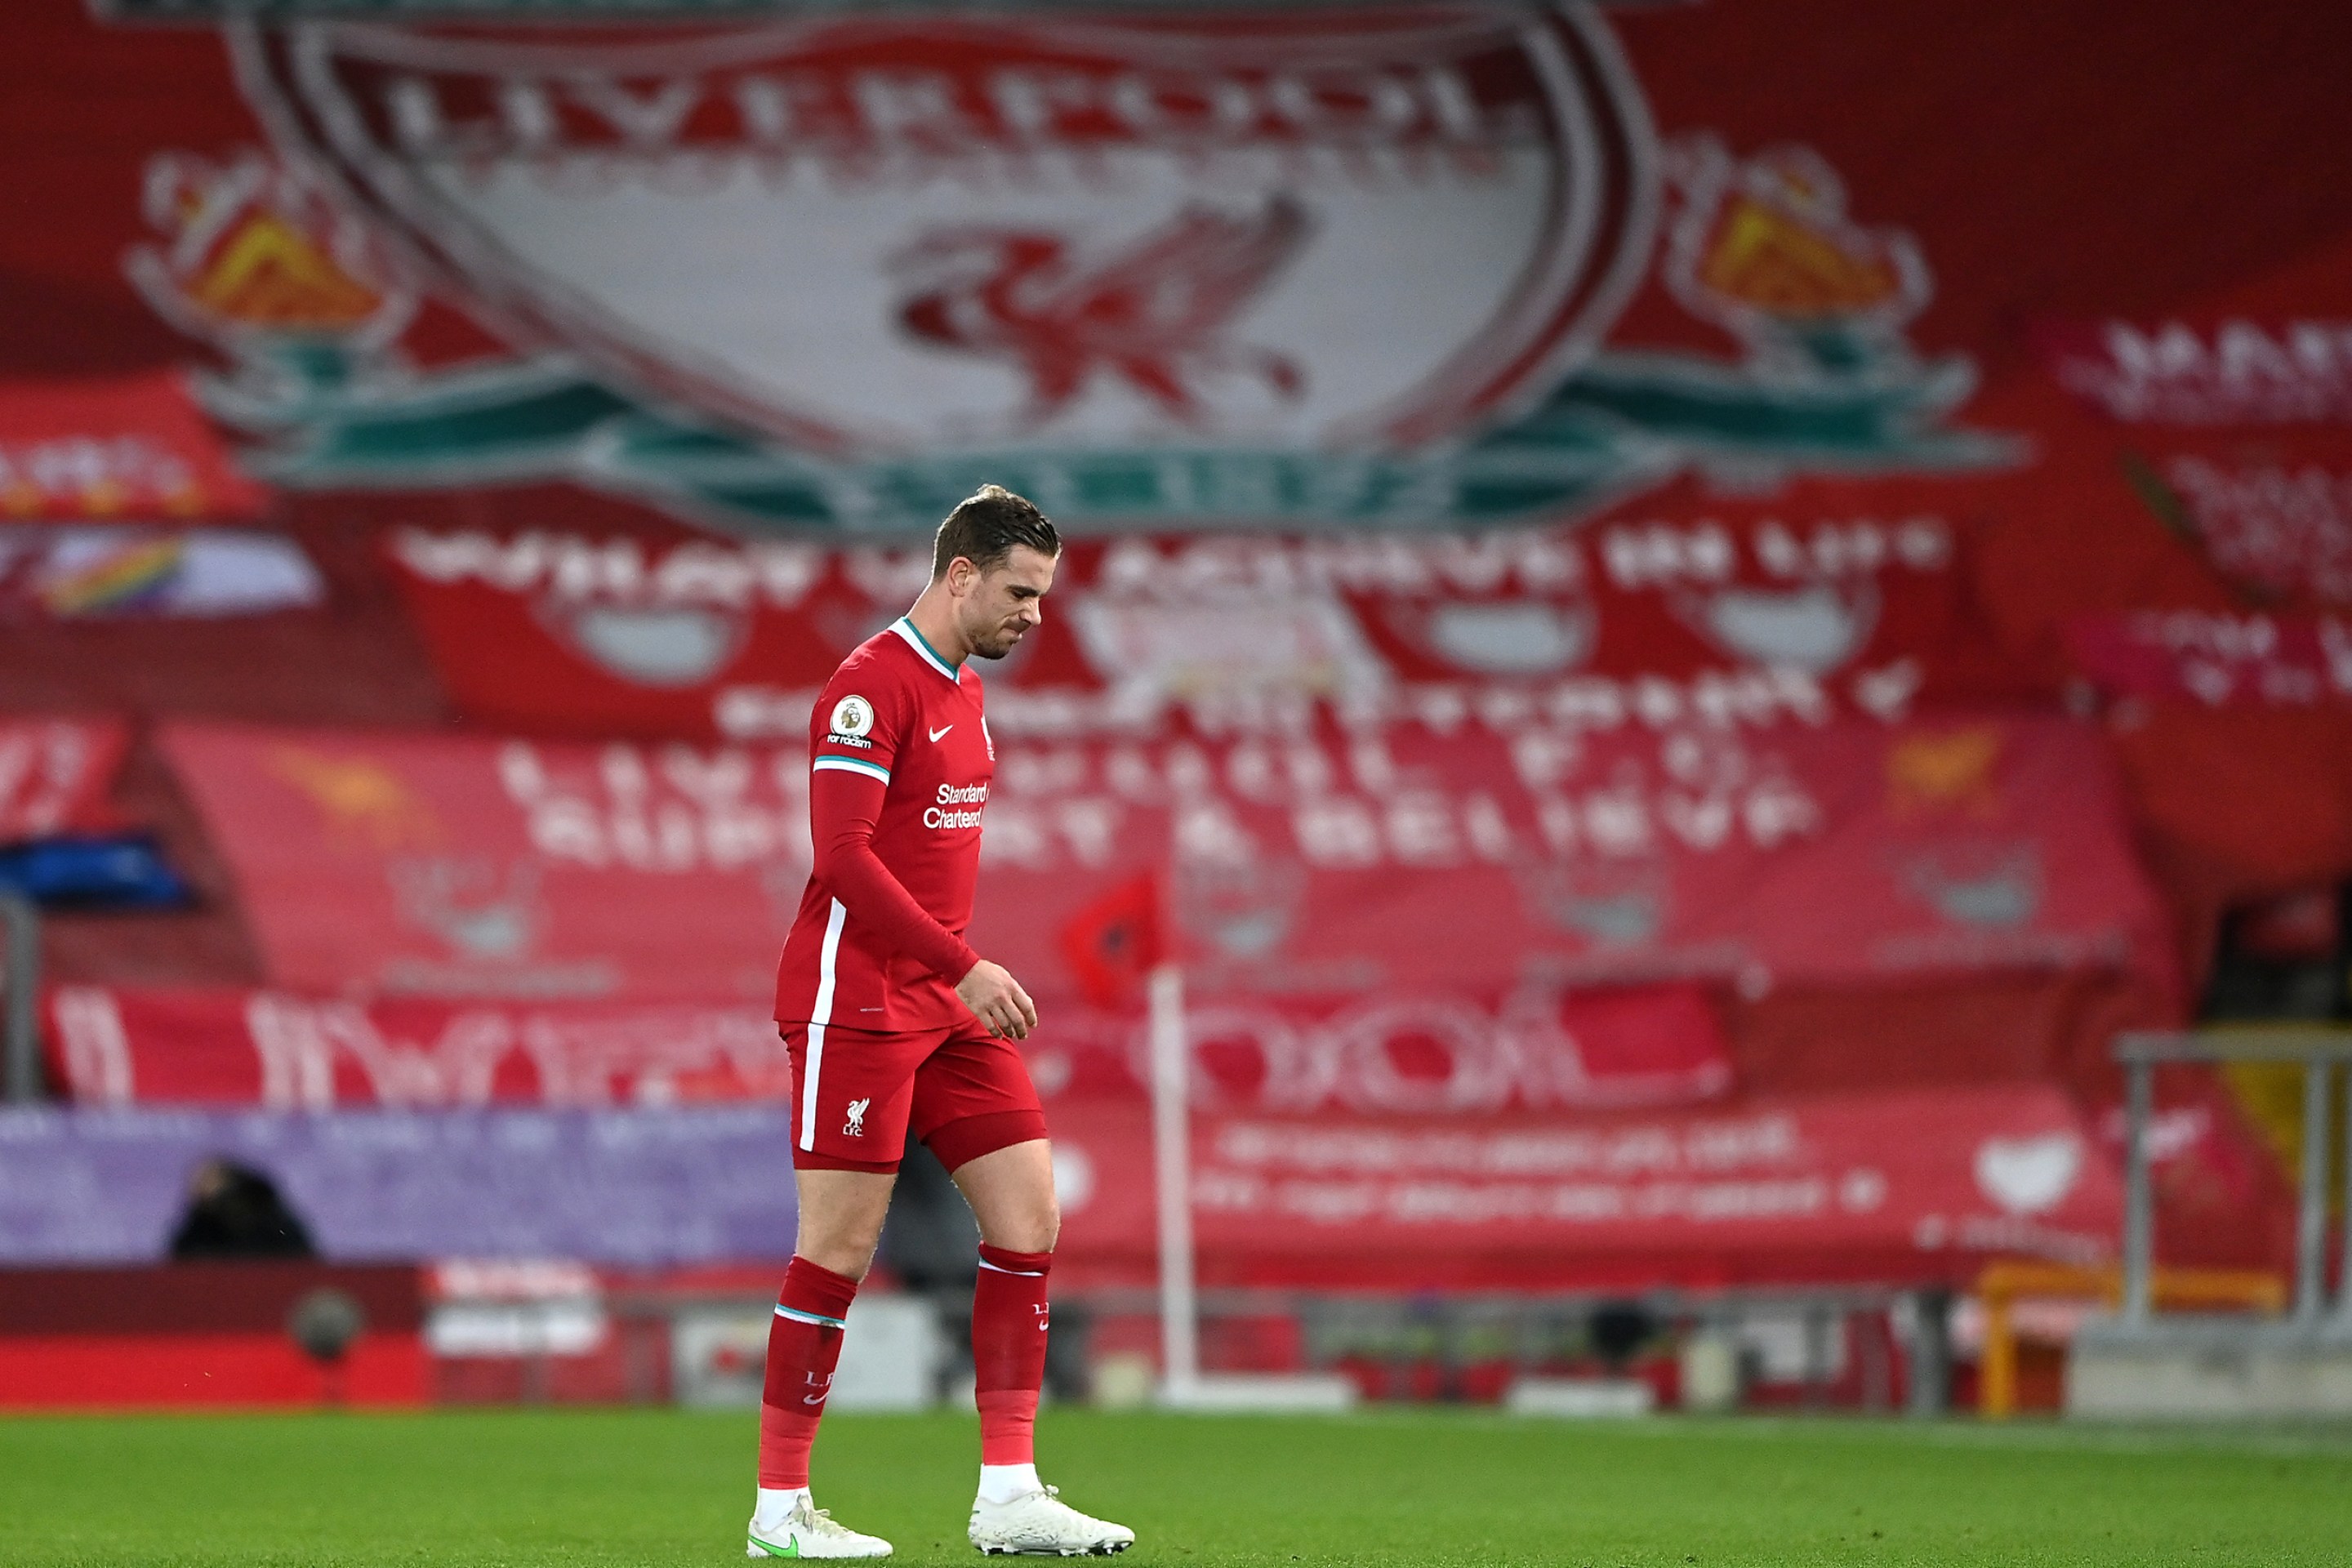 Jordan Henderson of Liverpool leaves the pitch as he is substituted off due to injury during the Premier League match between Liverpool and Everton at Anfield on February 20, 2021 in Liverpool, England